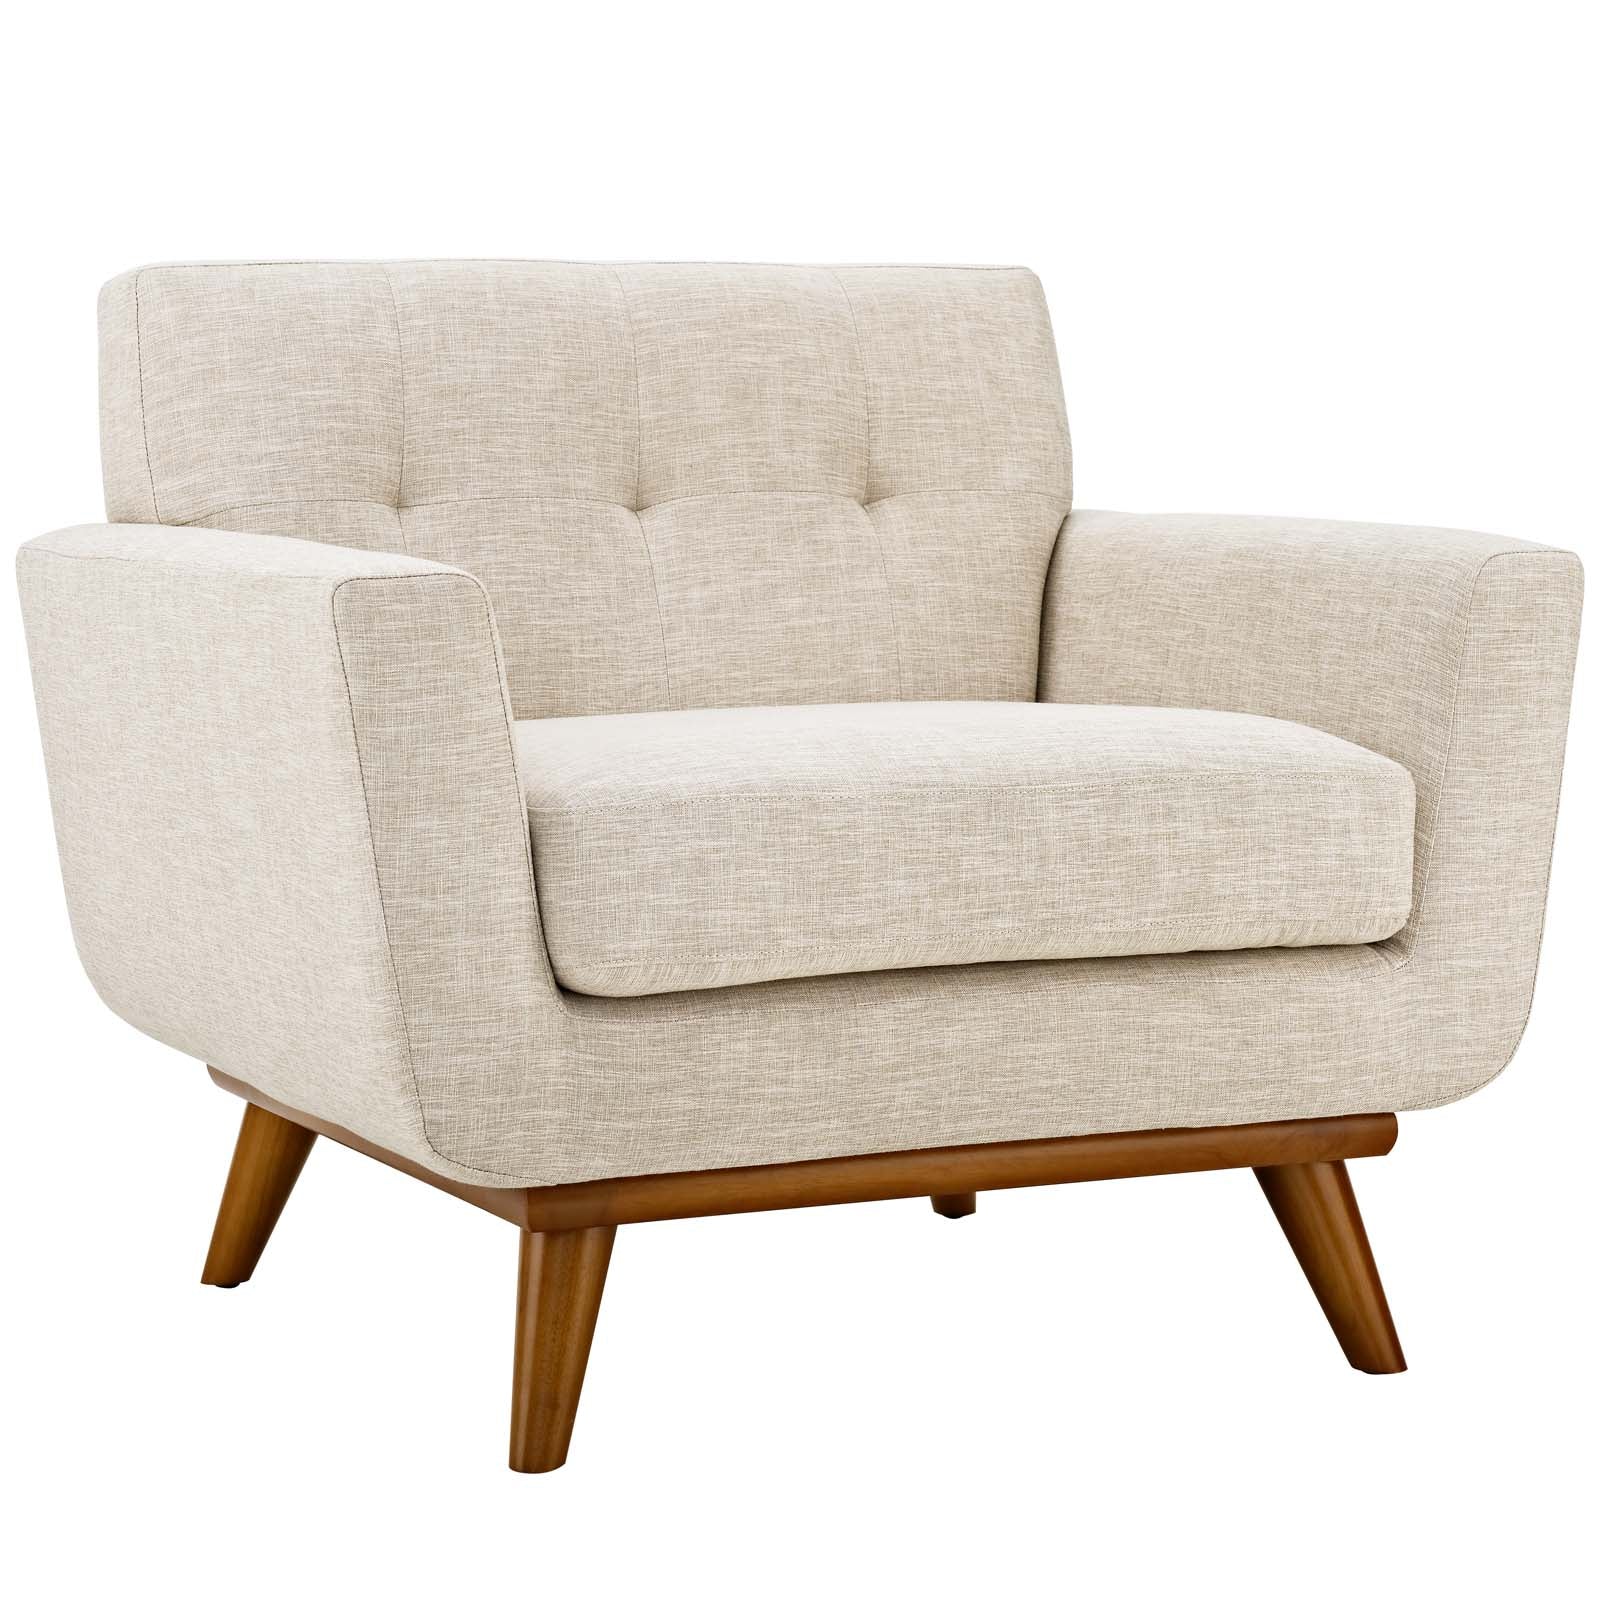 Modway Living Room Sets - Engage Armchair and Sofa Beige ( Set of 2 )